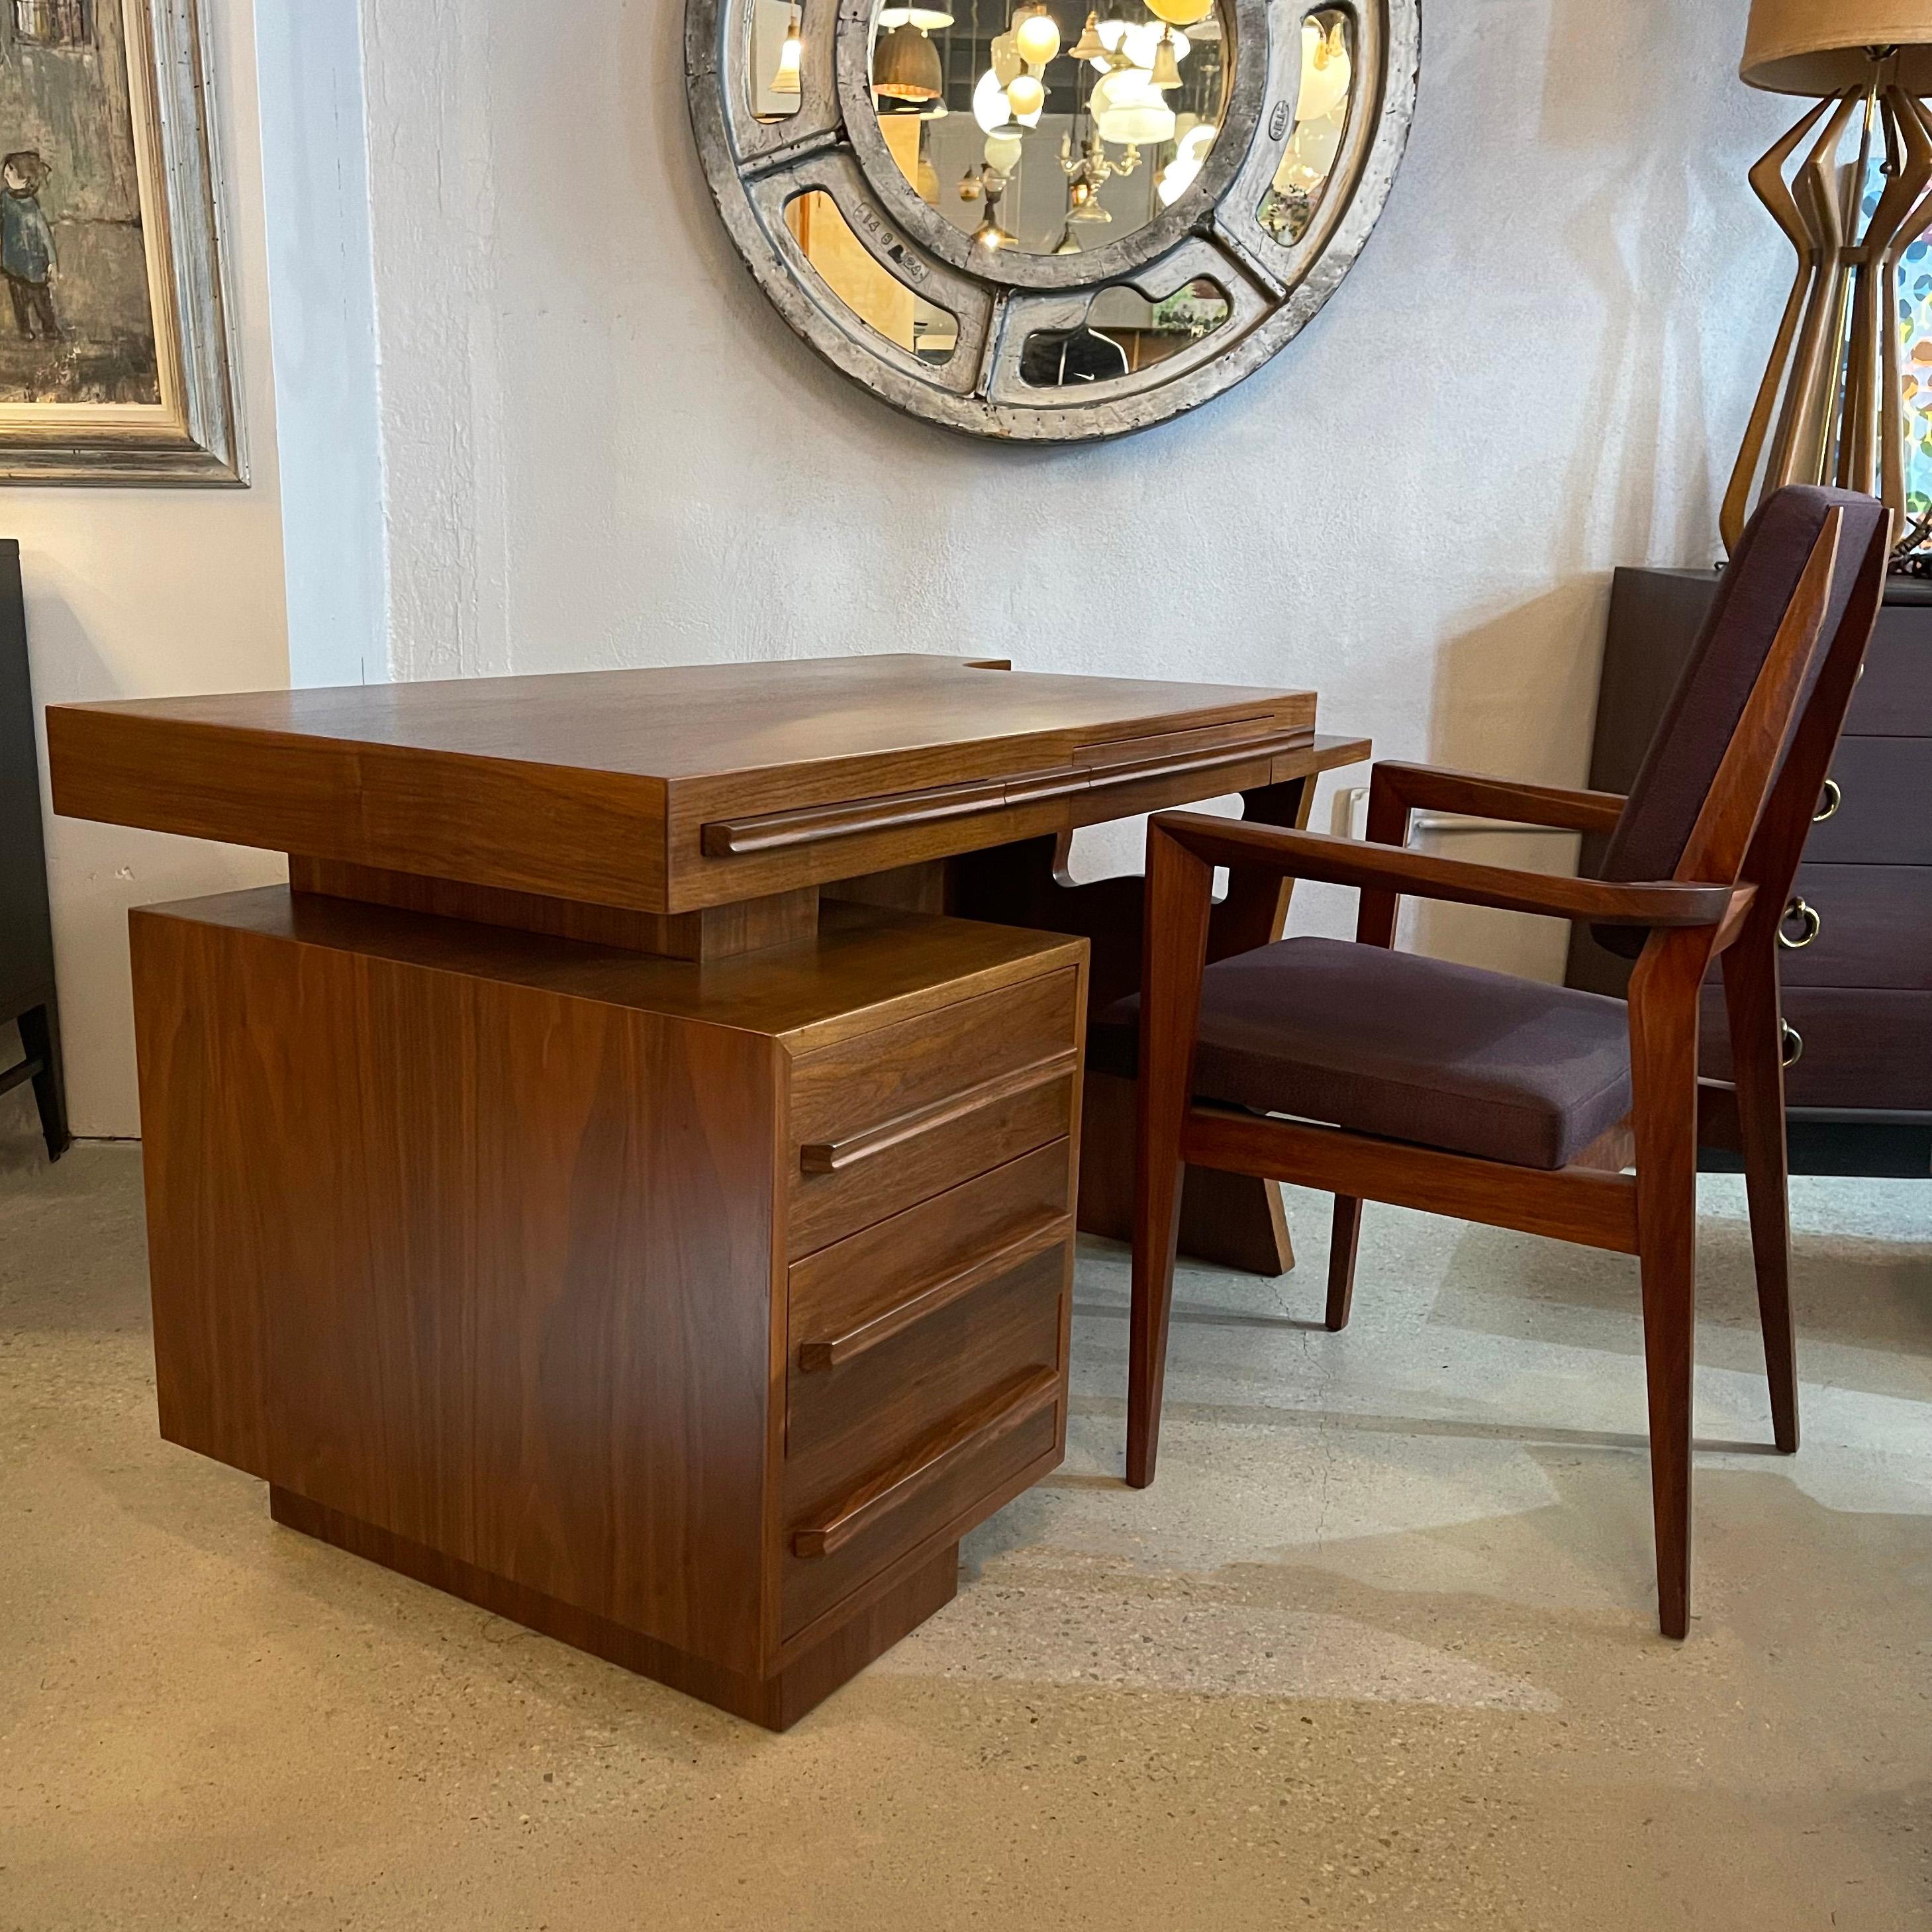 Mid-Century Modern Sculptural Cut-Out Walnut Desk In Good Condition For Sale In Brooklyn, NY